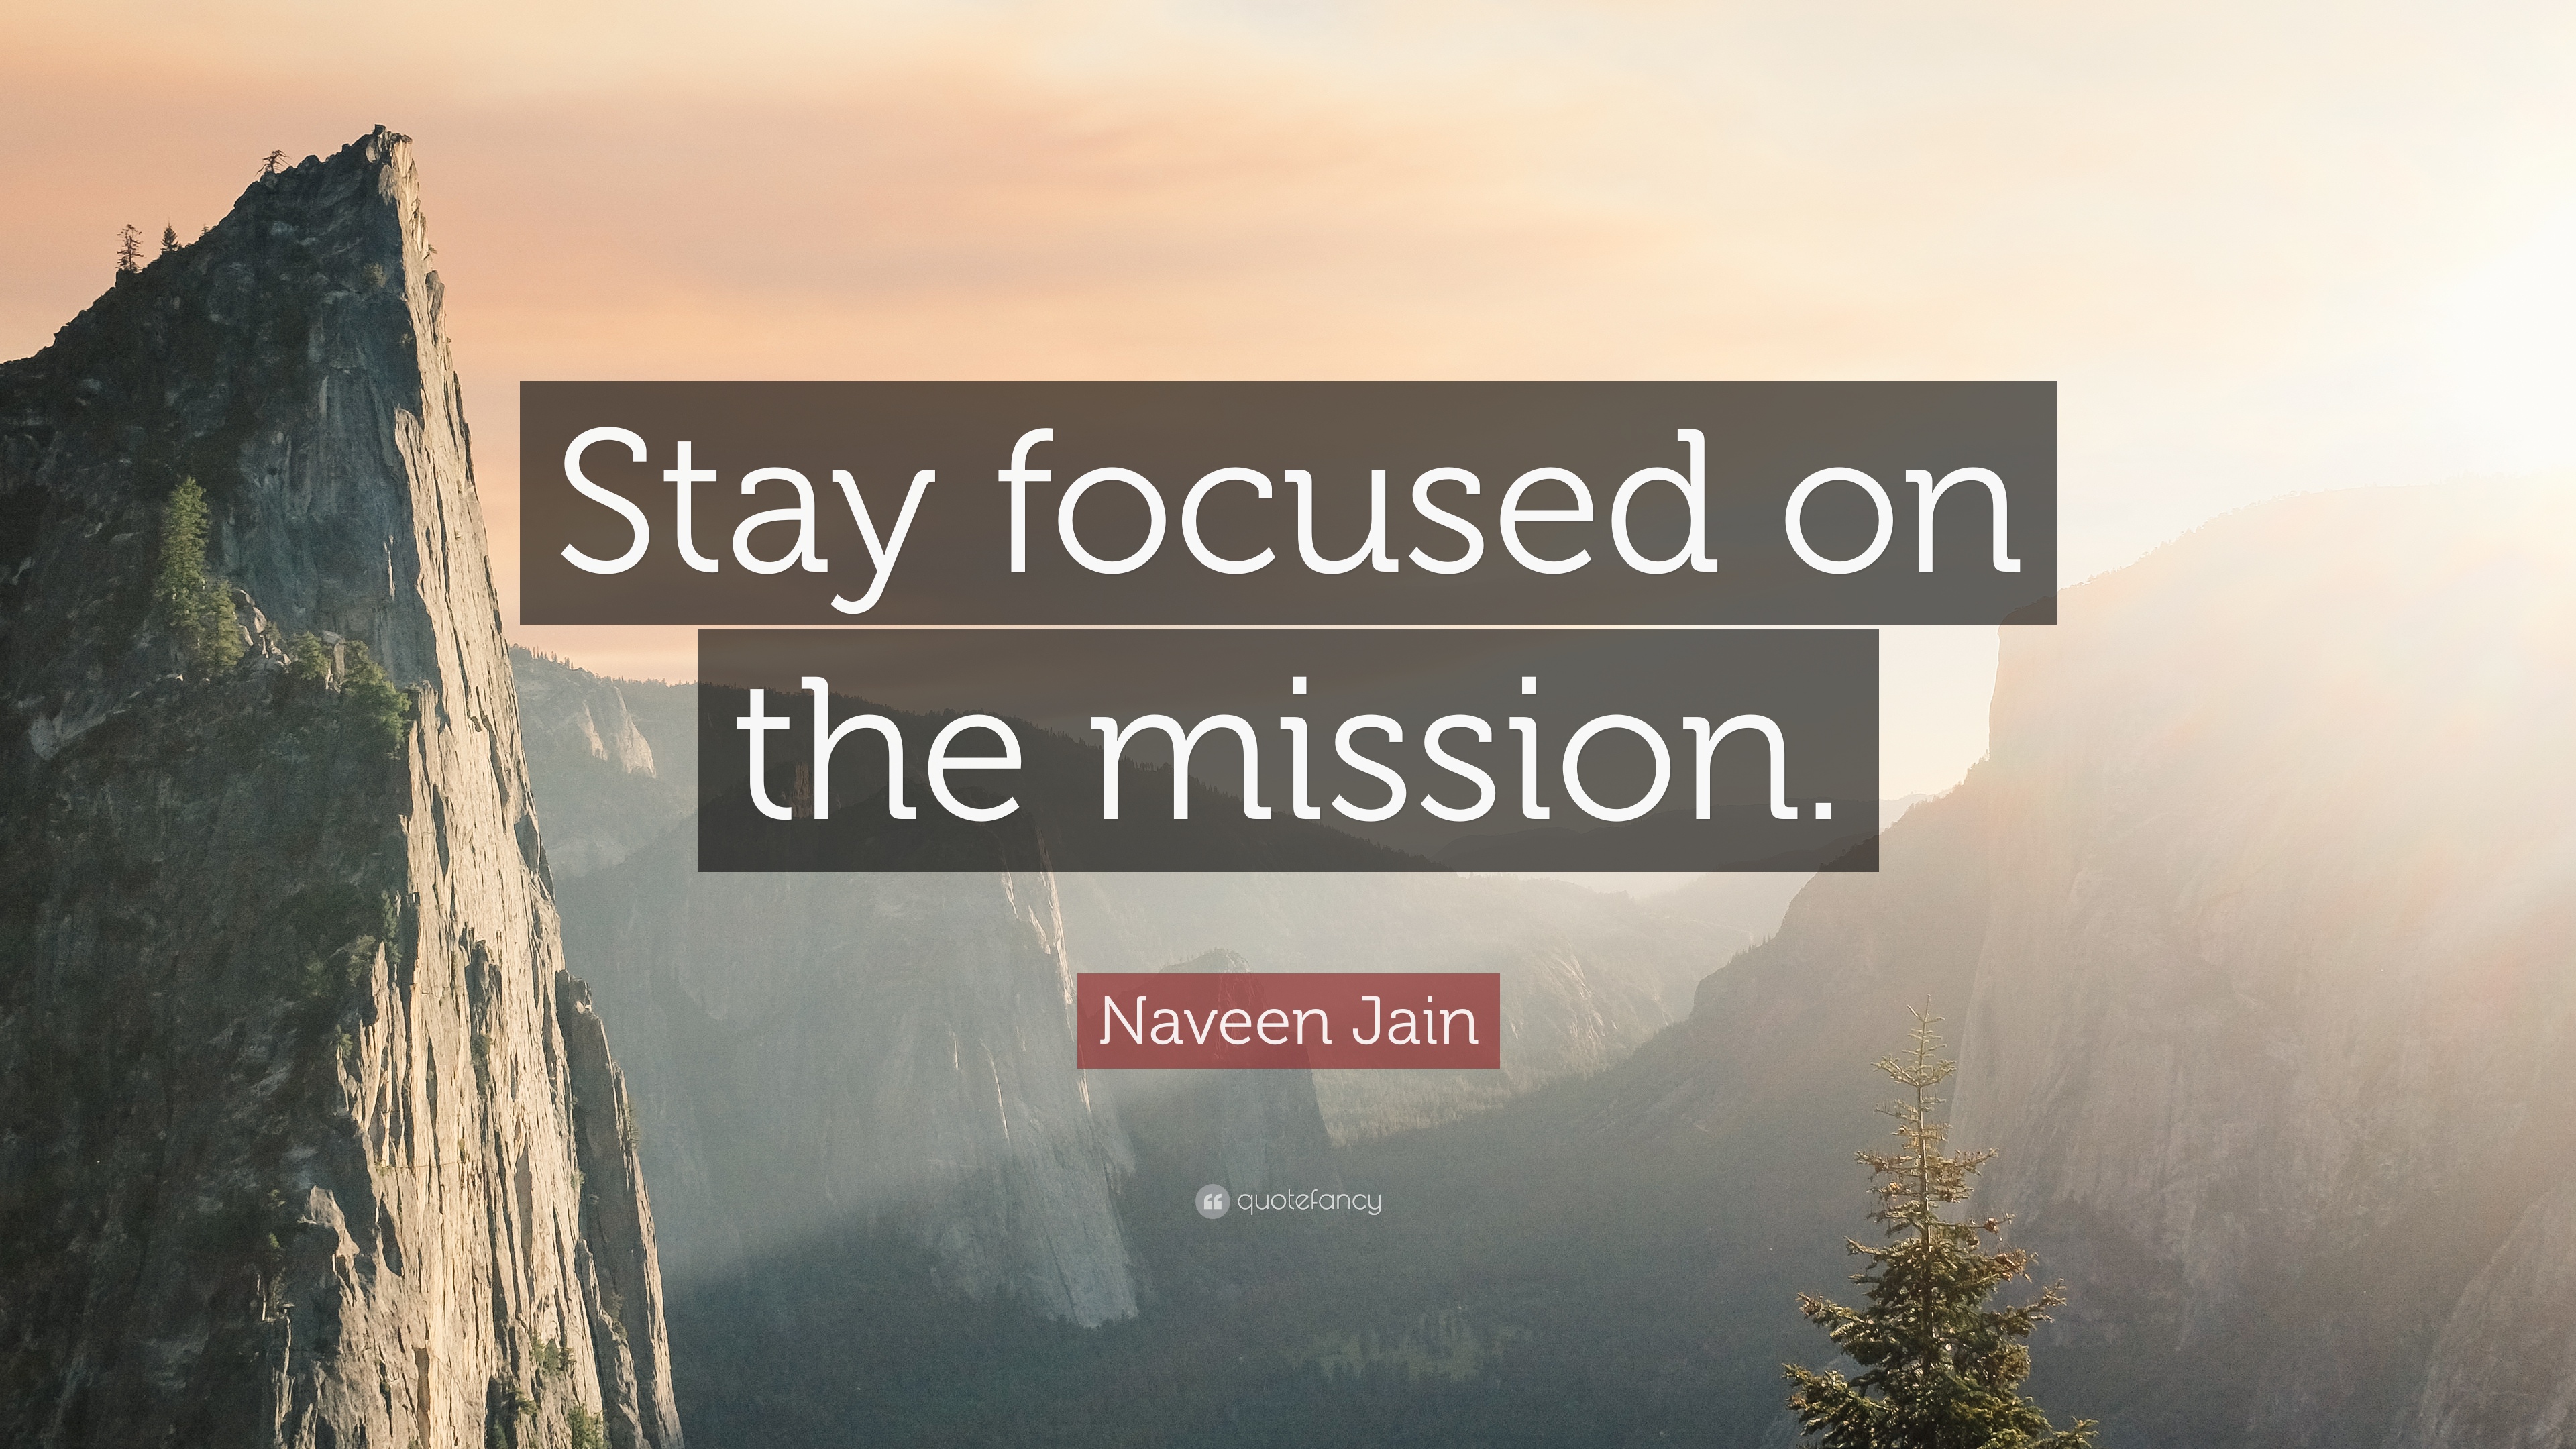 Naveen Jain Quote: “Stay focused on the mission.” 12